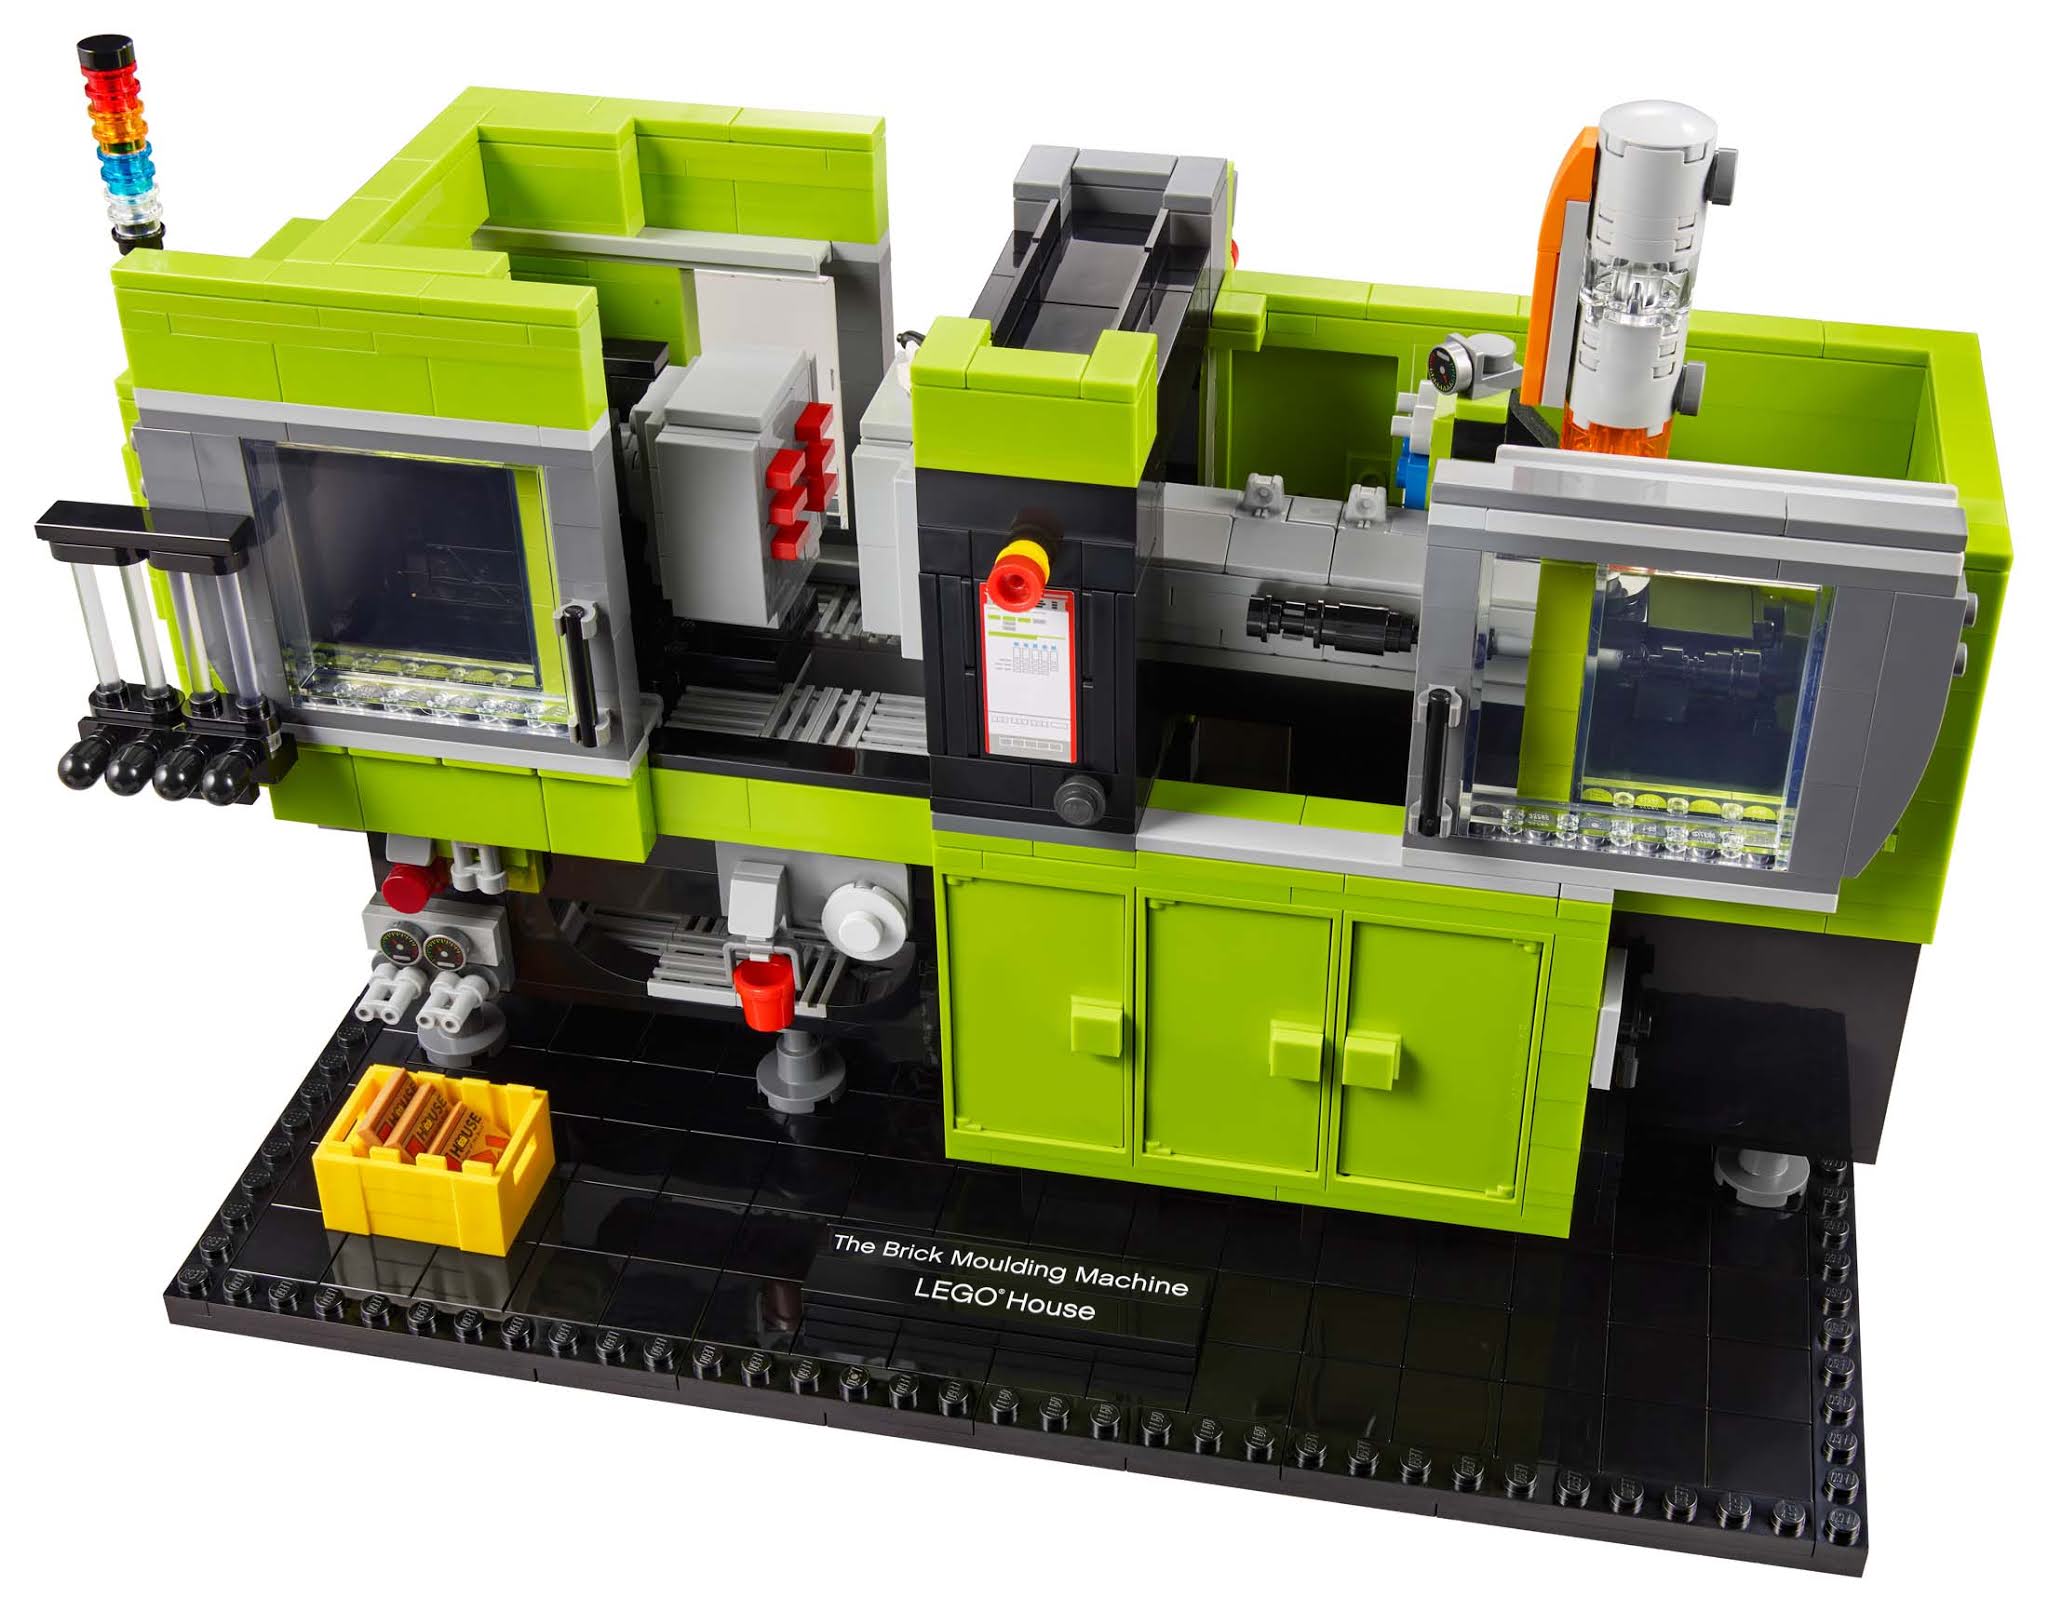 LEGO® Limited Edition reveal: The Moulding Machine | New Elementary: parts, sets and techniques